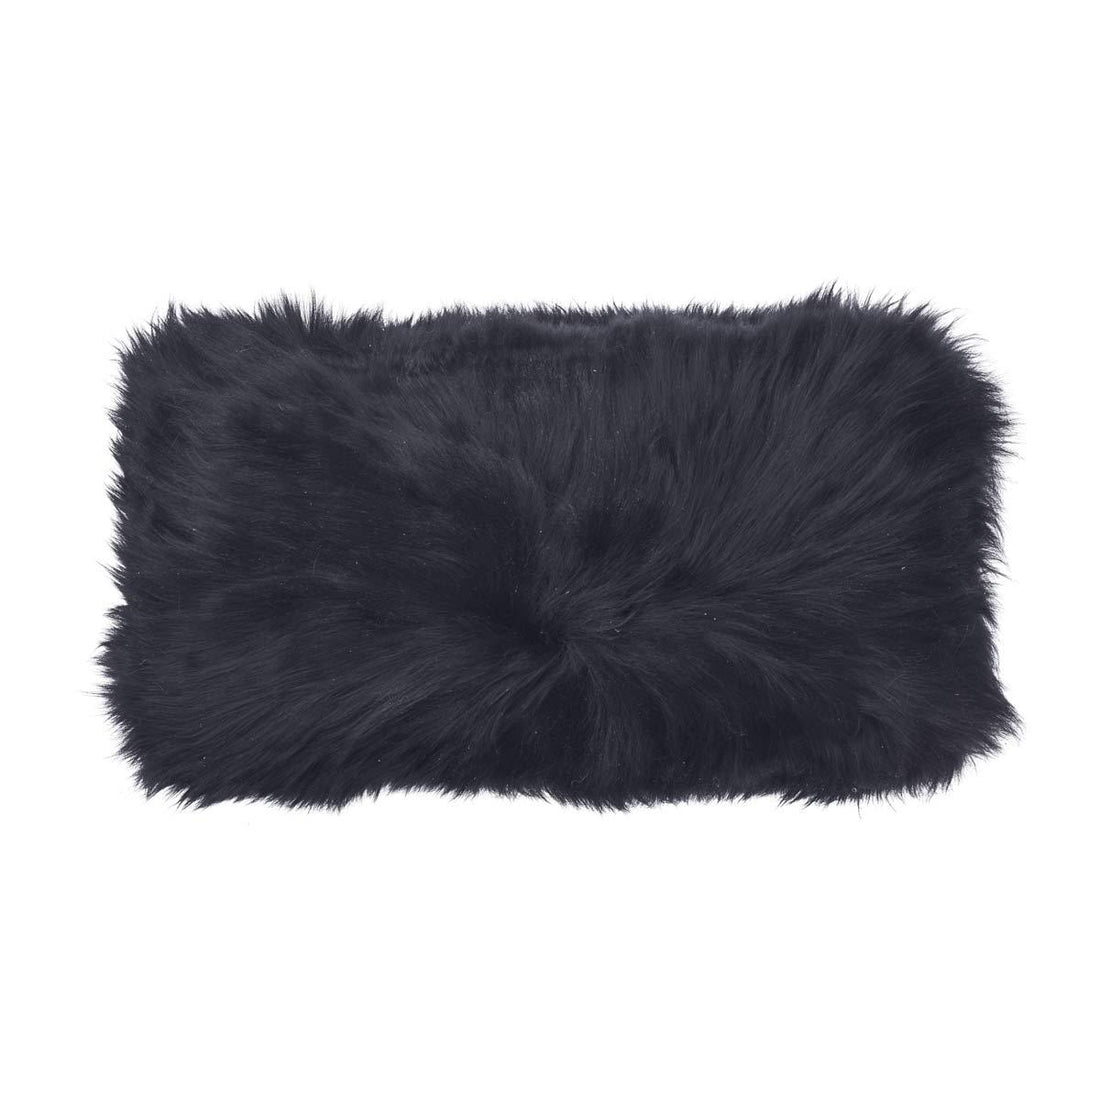 Pillow | Lambskin | Long -haired | Double -sided | New Zealand | 25x50 cm.